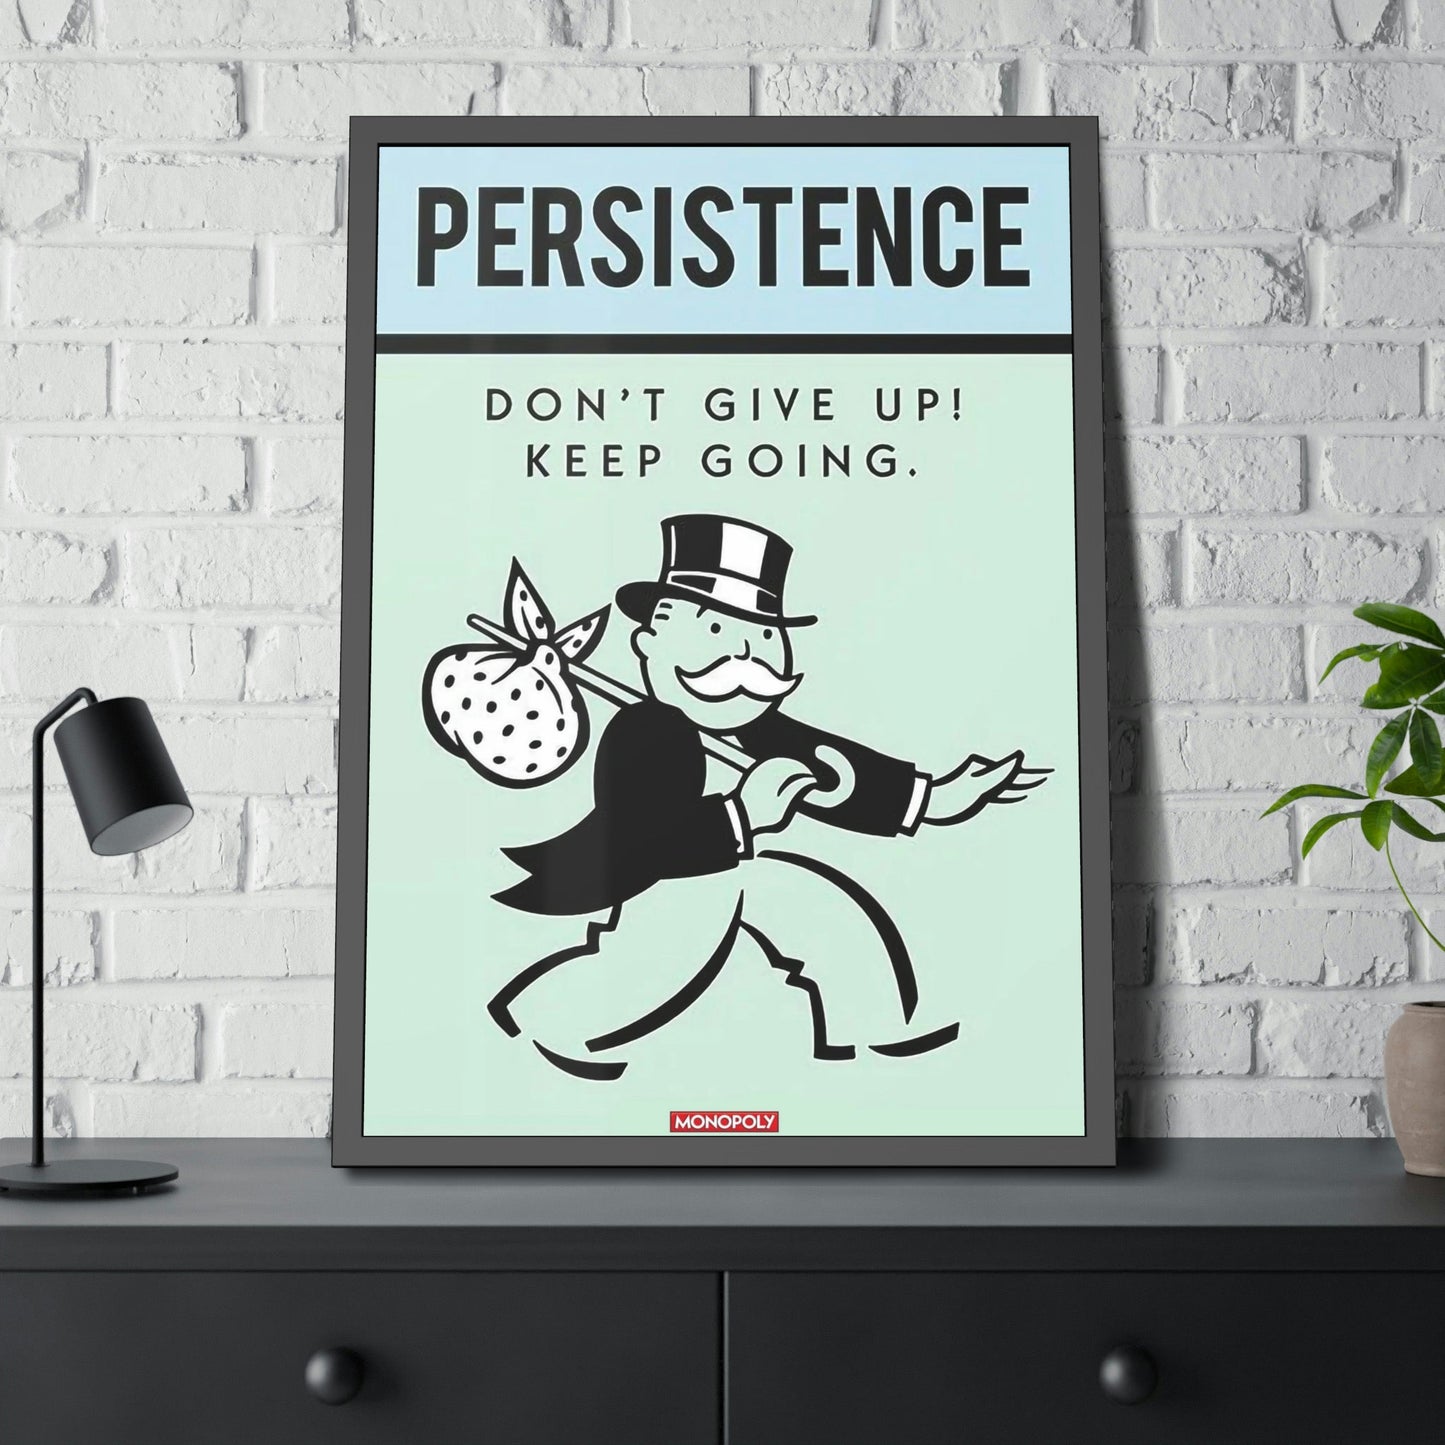 Creative Wall Decor: Alec Monopoly's Quote Art on Natural Canvas